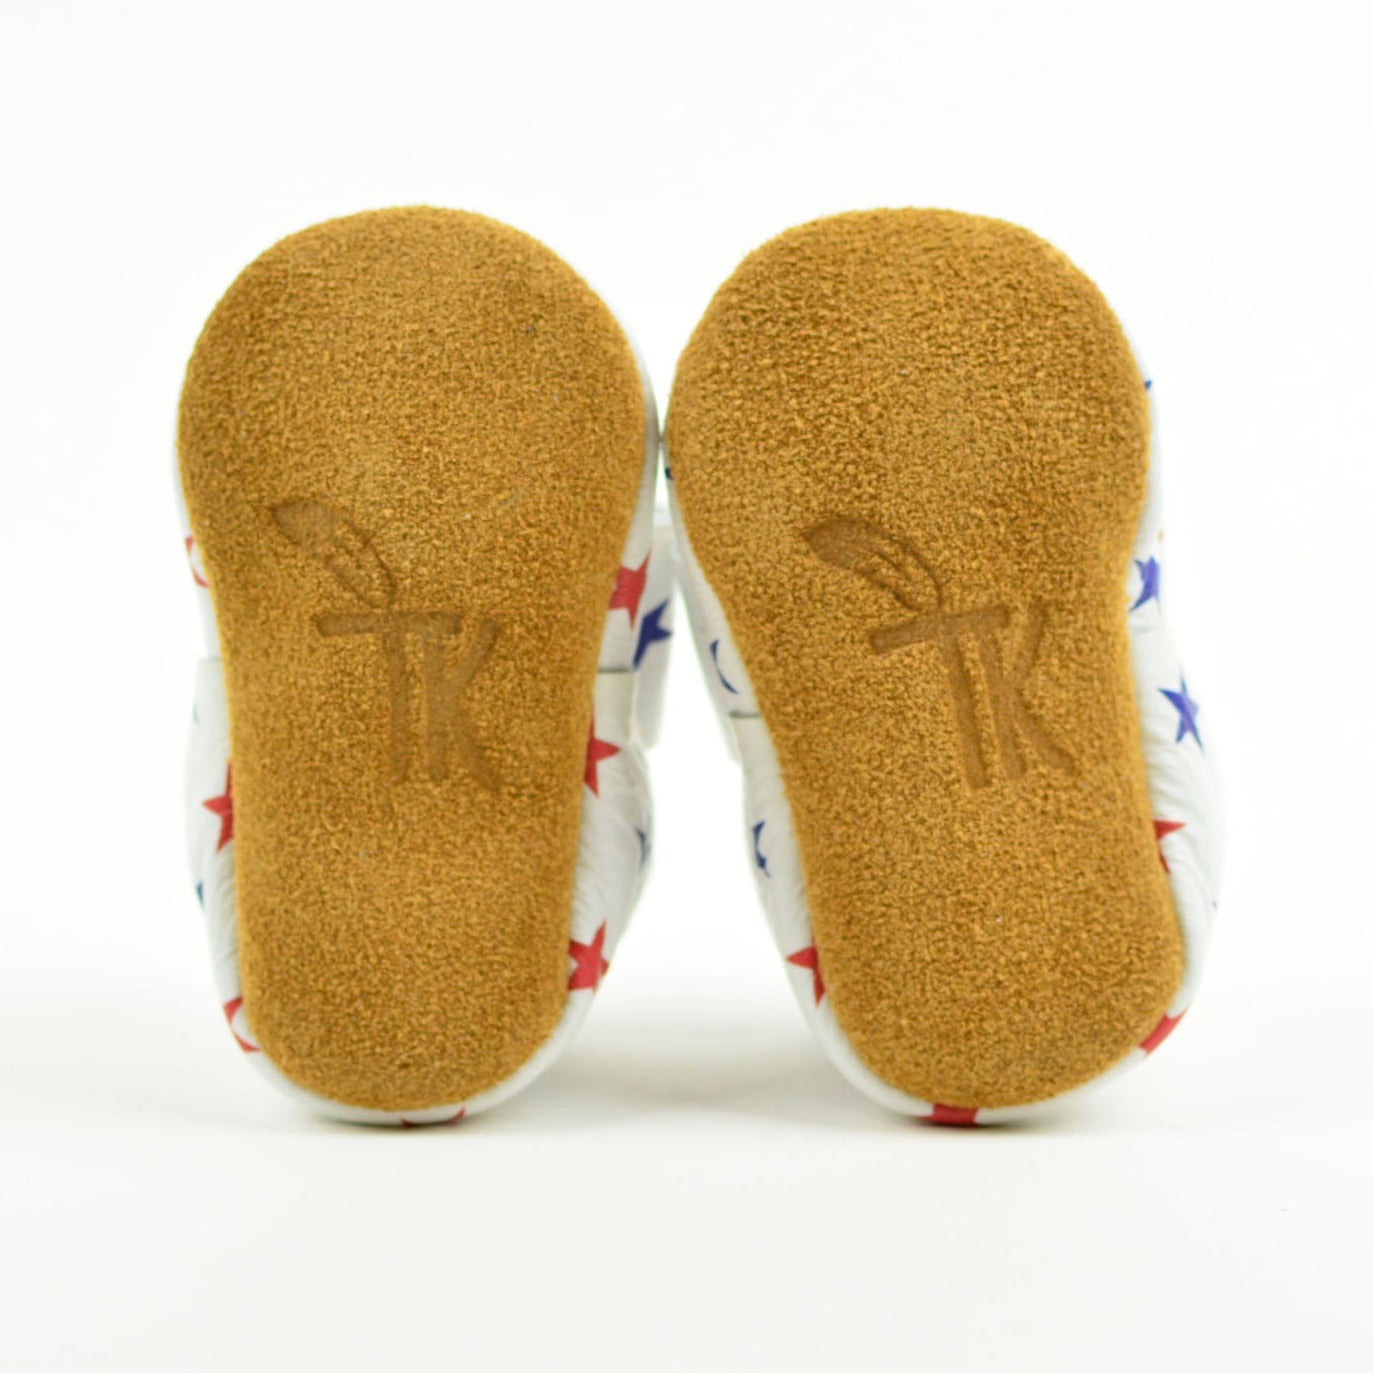 RTS Moccasins Star Spangled Baby and Toddler Shoes Sizes 0-2